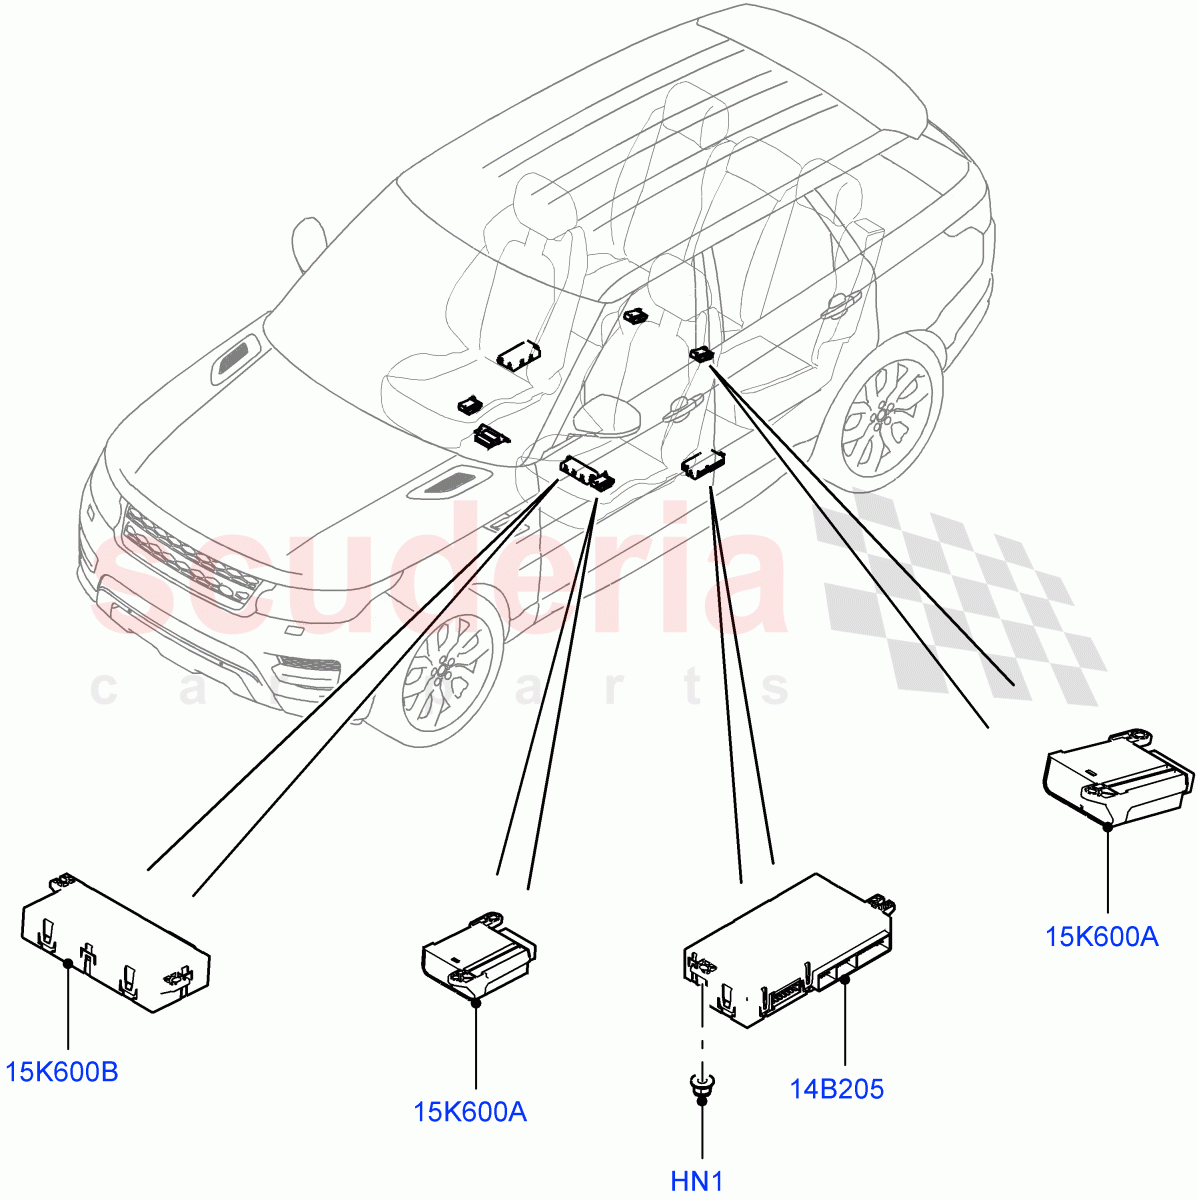 Vehicle Modules And Sensors(Seats) of Land Rover Land Rover Range Rover Sport (2014+) [3.0 DOHC GDI SC V6 Petrol]